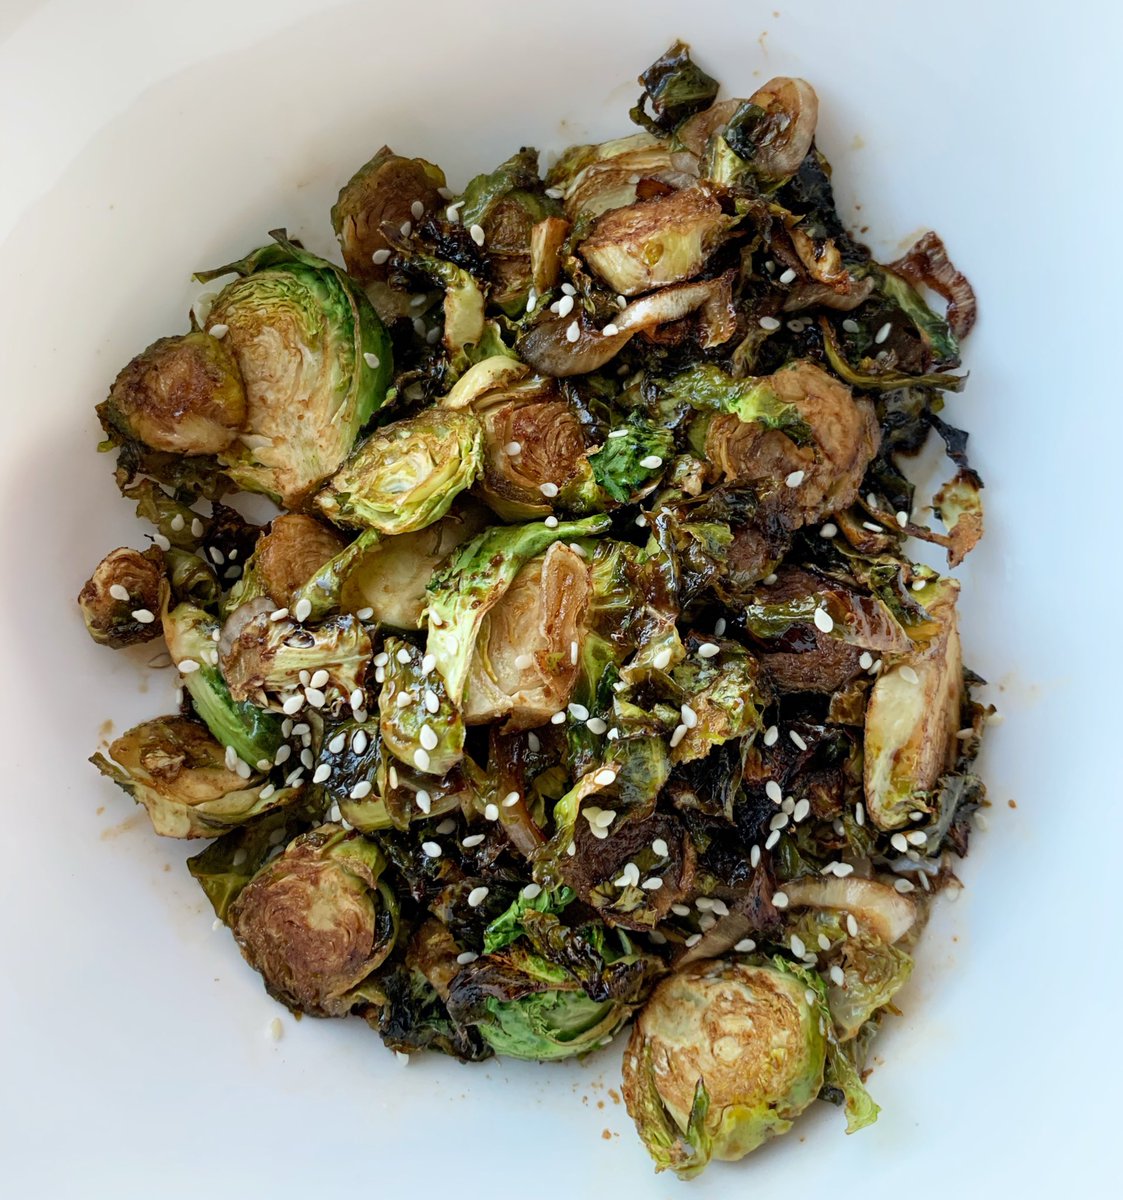 Balsamic Roasted Brussels Sprouts - super easy + fool proof because they taste better a little burnt  Full recipe here -  https://whereshebegins.com/plant-based-bre/2018/1/9/balsamic-brussel-sprouts |  #plantbasedbre